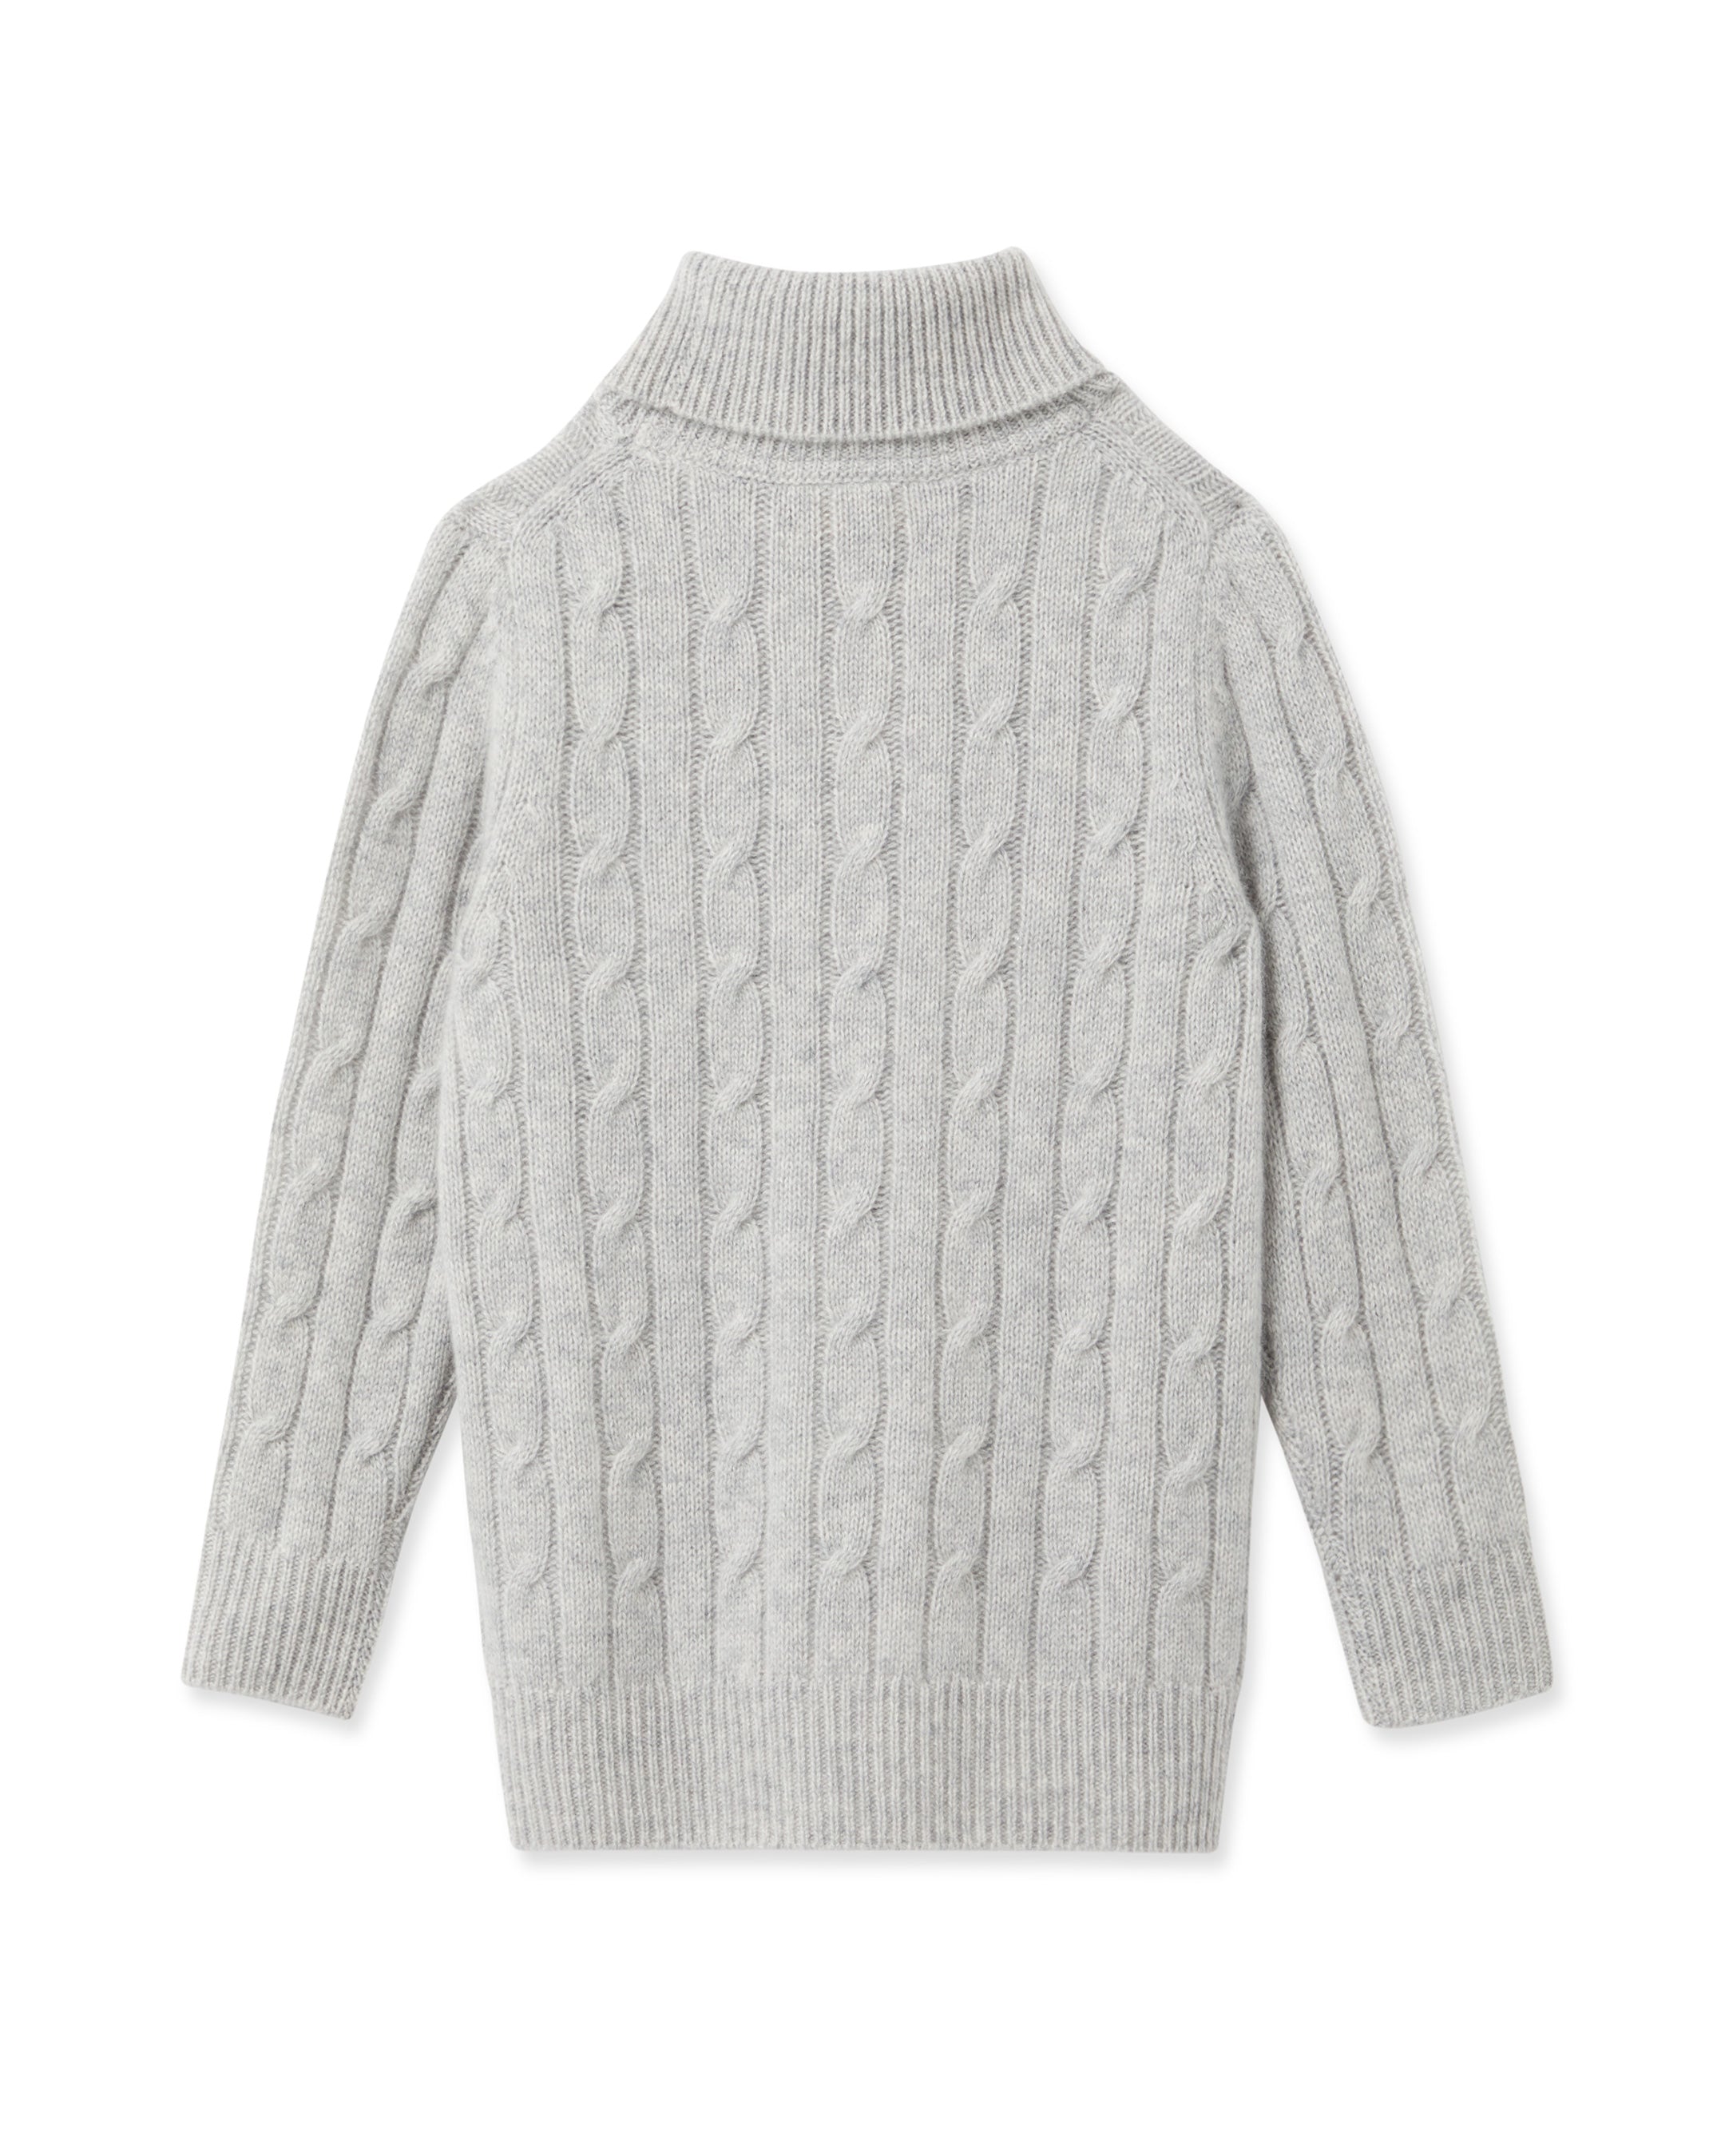 Boys Cable Turtle Neck Cashmere Sweater Fumo Grey | N.Peal